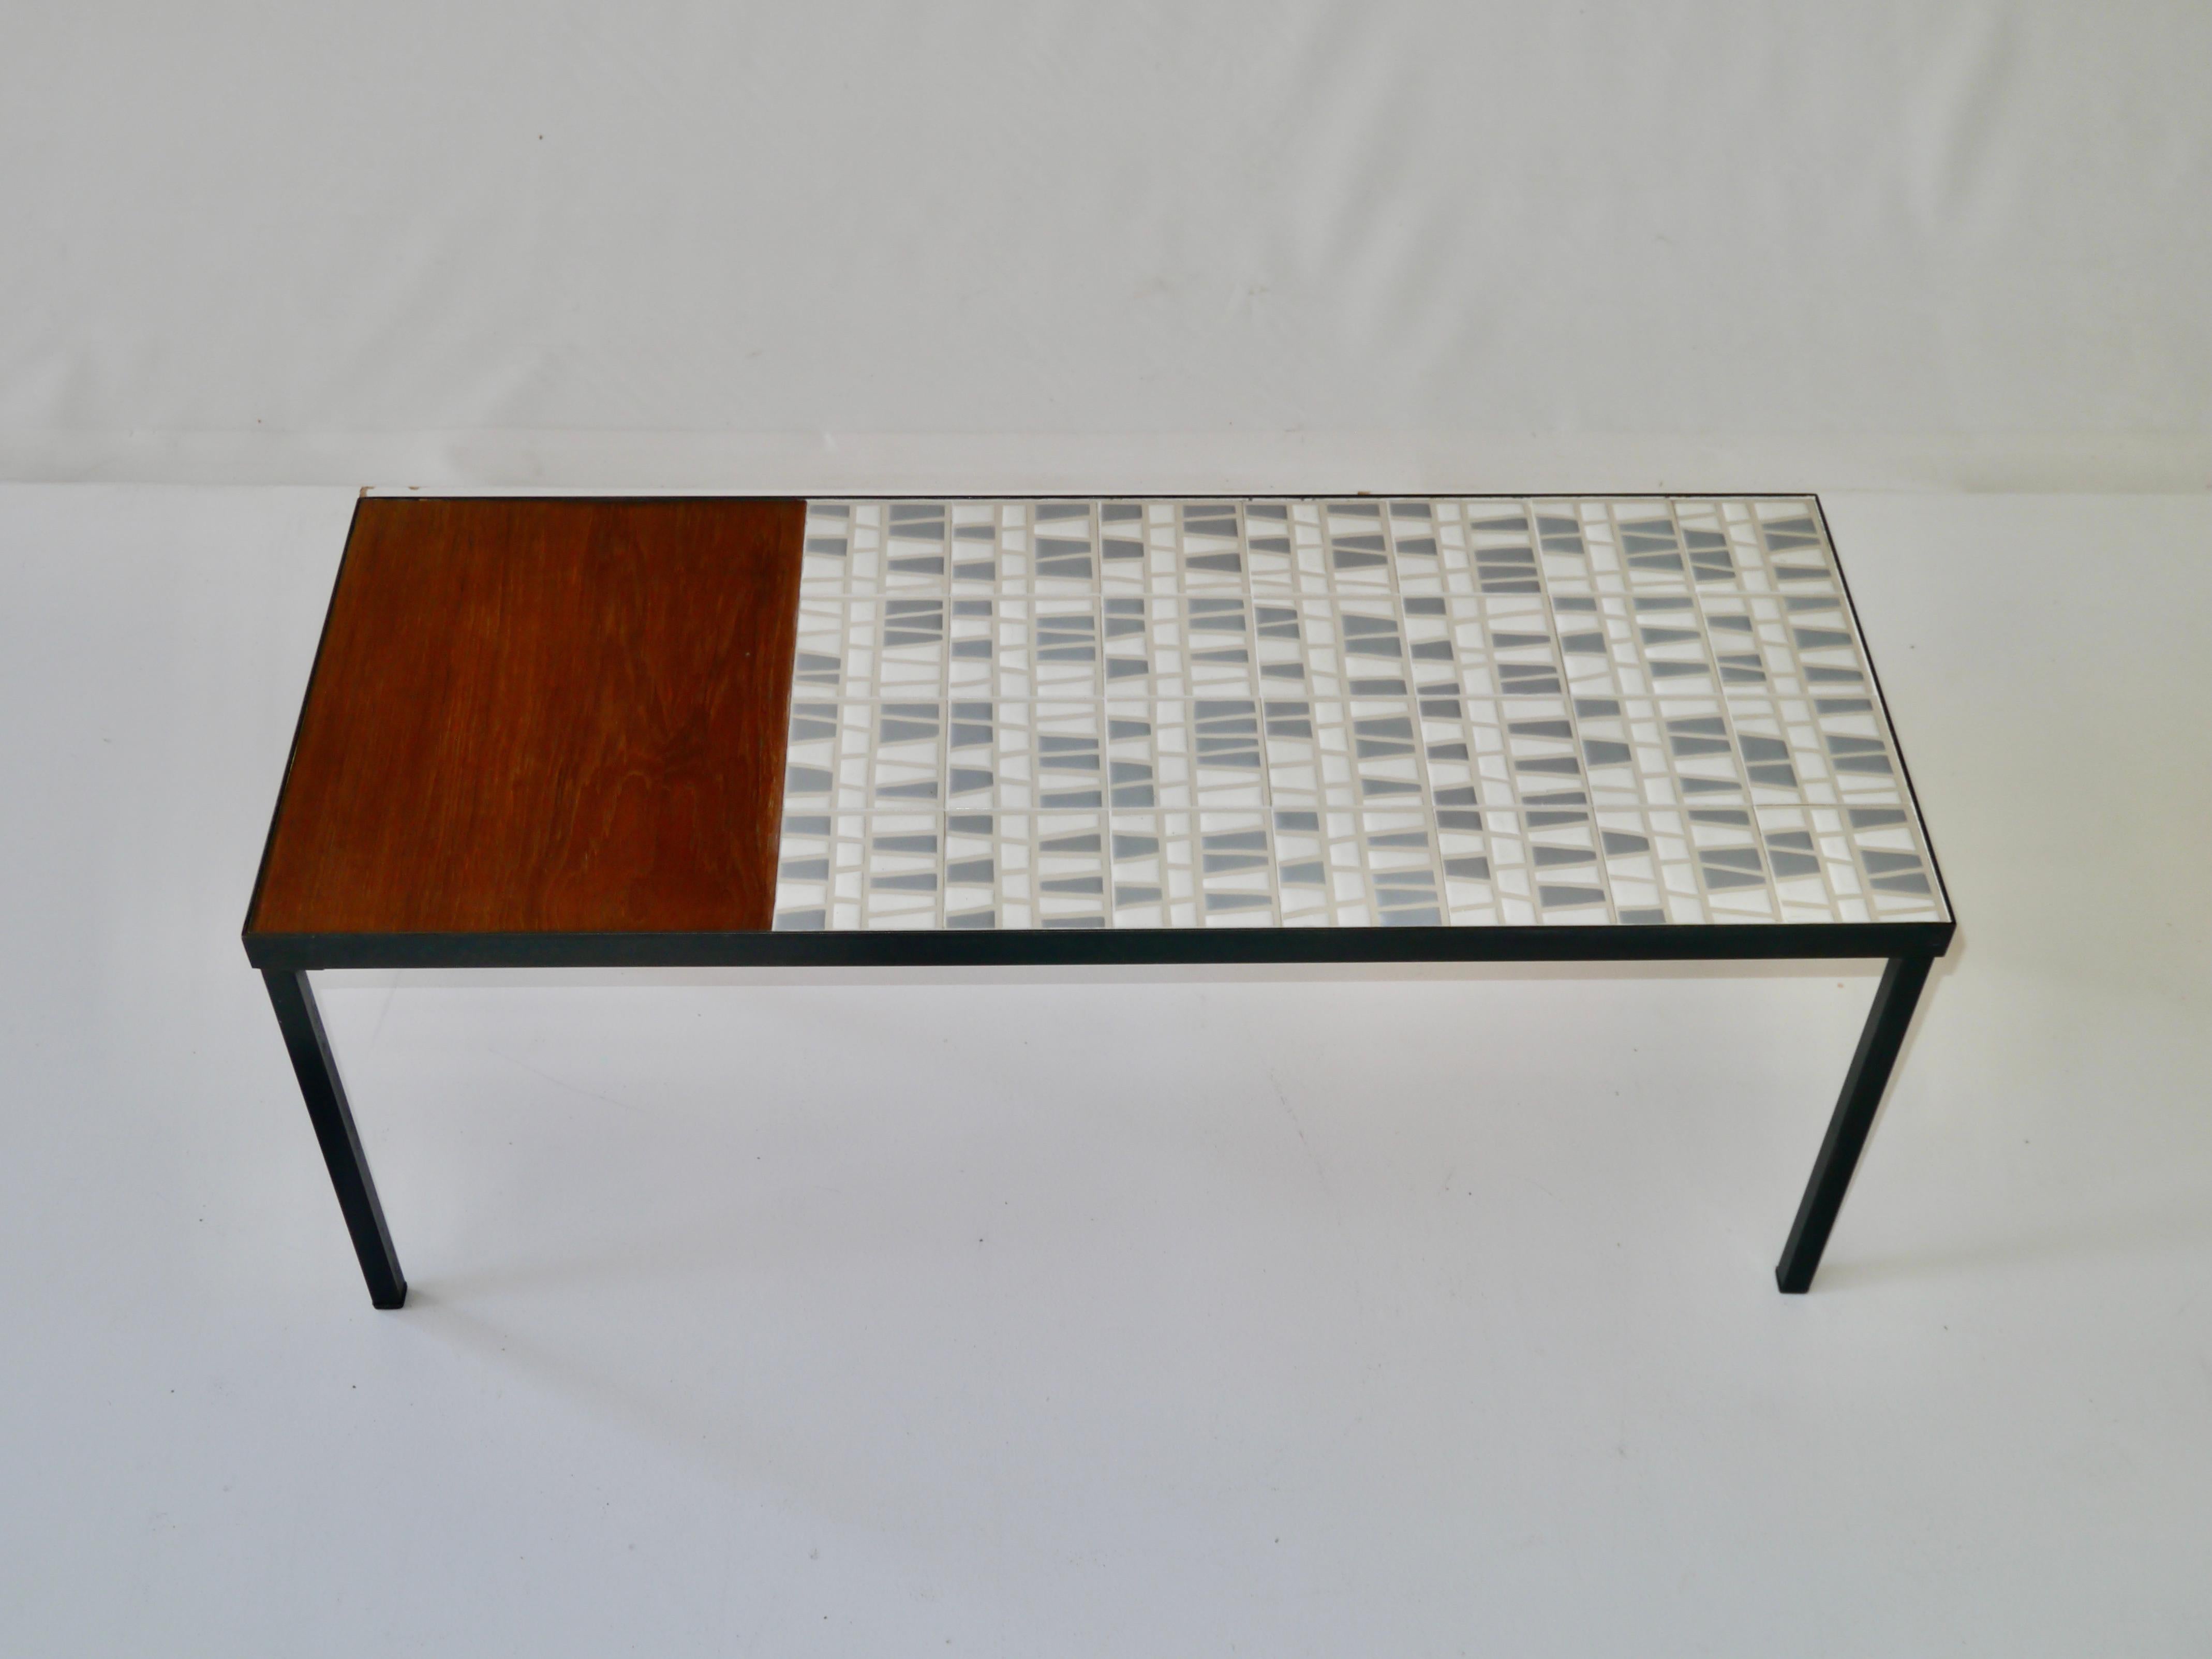 Coffee table made up of a glazed ceramic tiles top opposite a teak part,
structure and feet in black lacquered steel.
The handcrafted tiles are glazed using the paraffin reserve technique which brings particular relief to the design made with satin